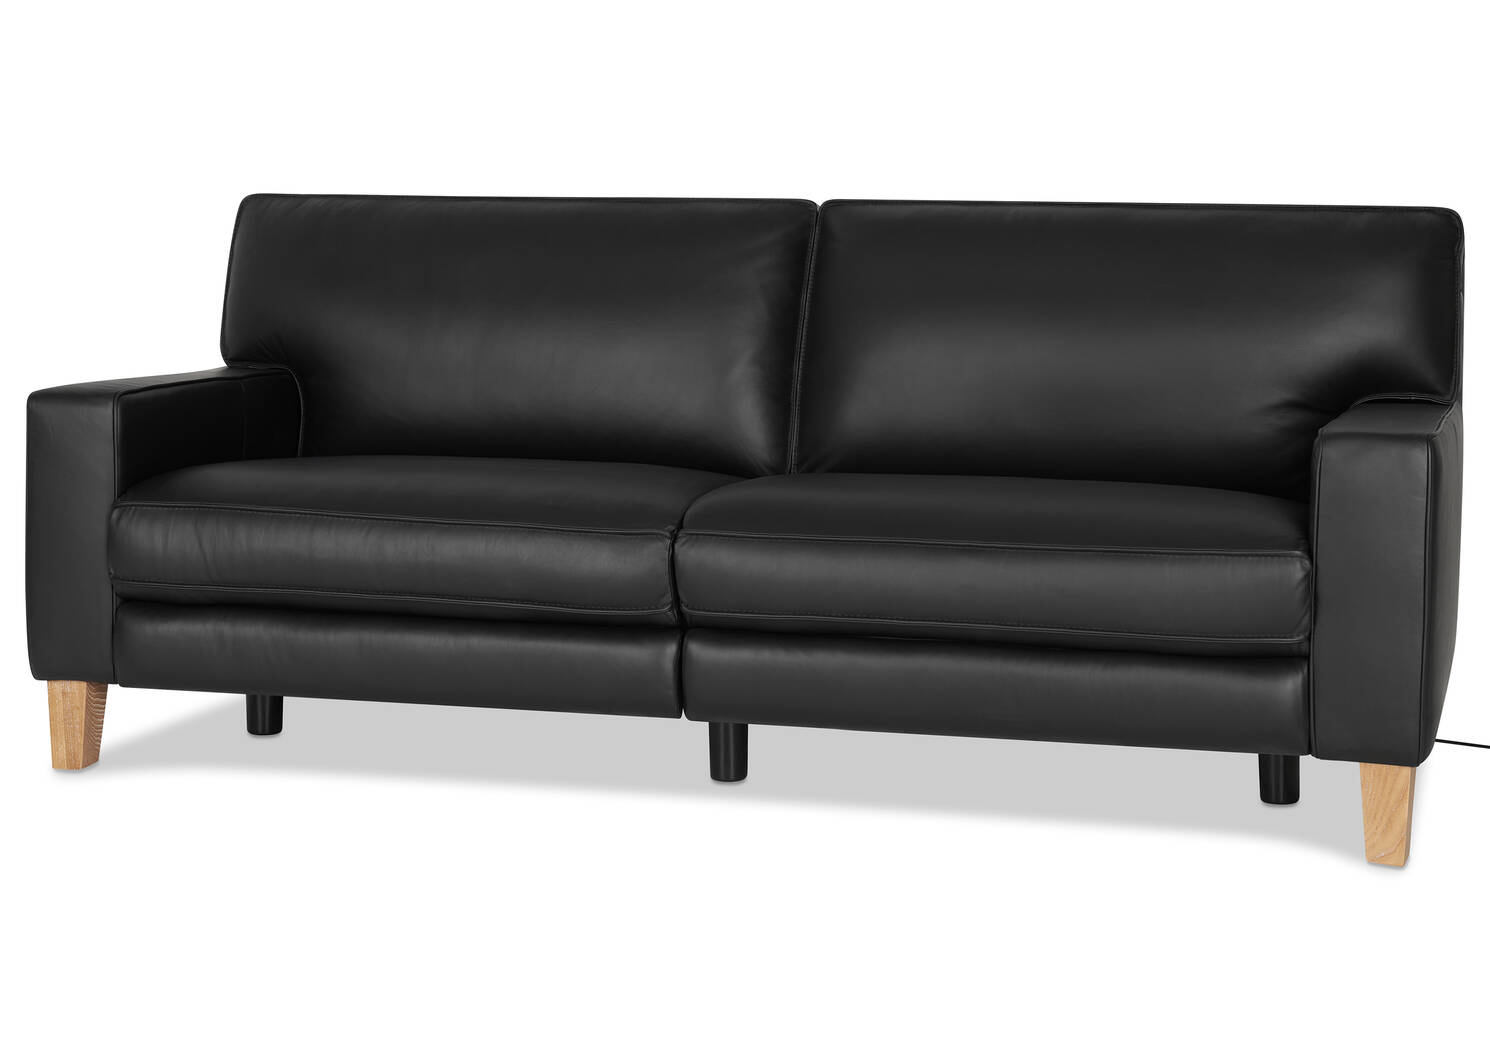 Hardy Leather Relaxer Sofa -Alec Noir